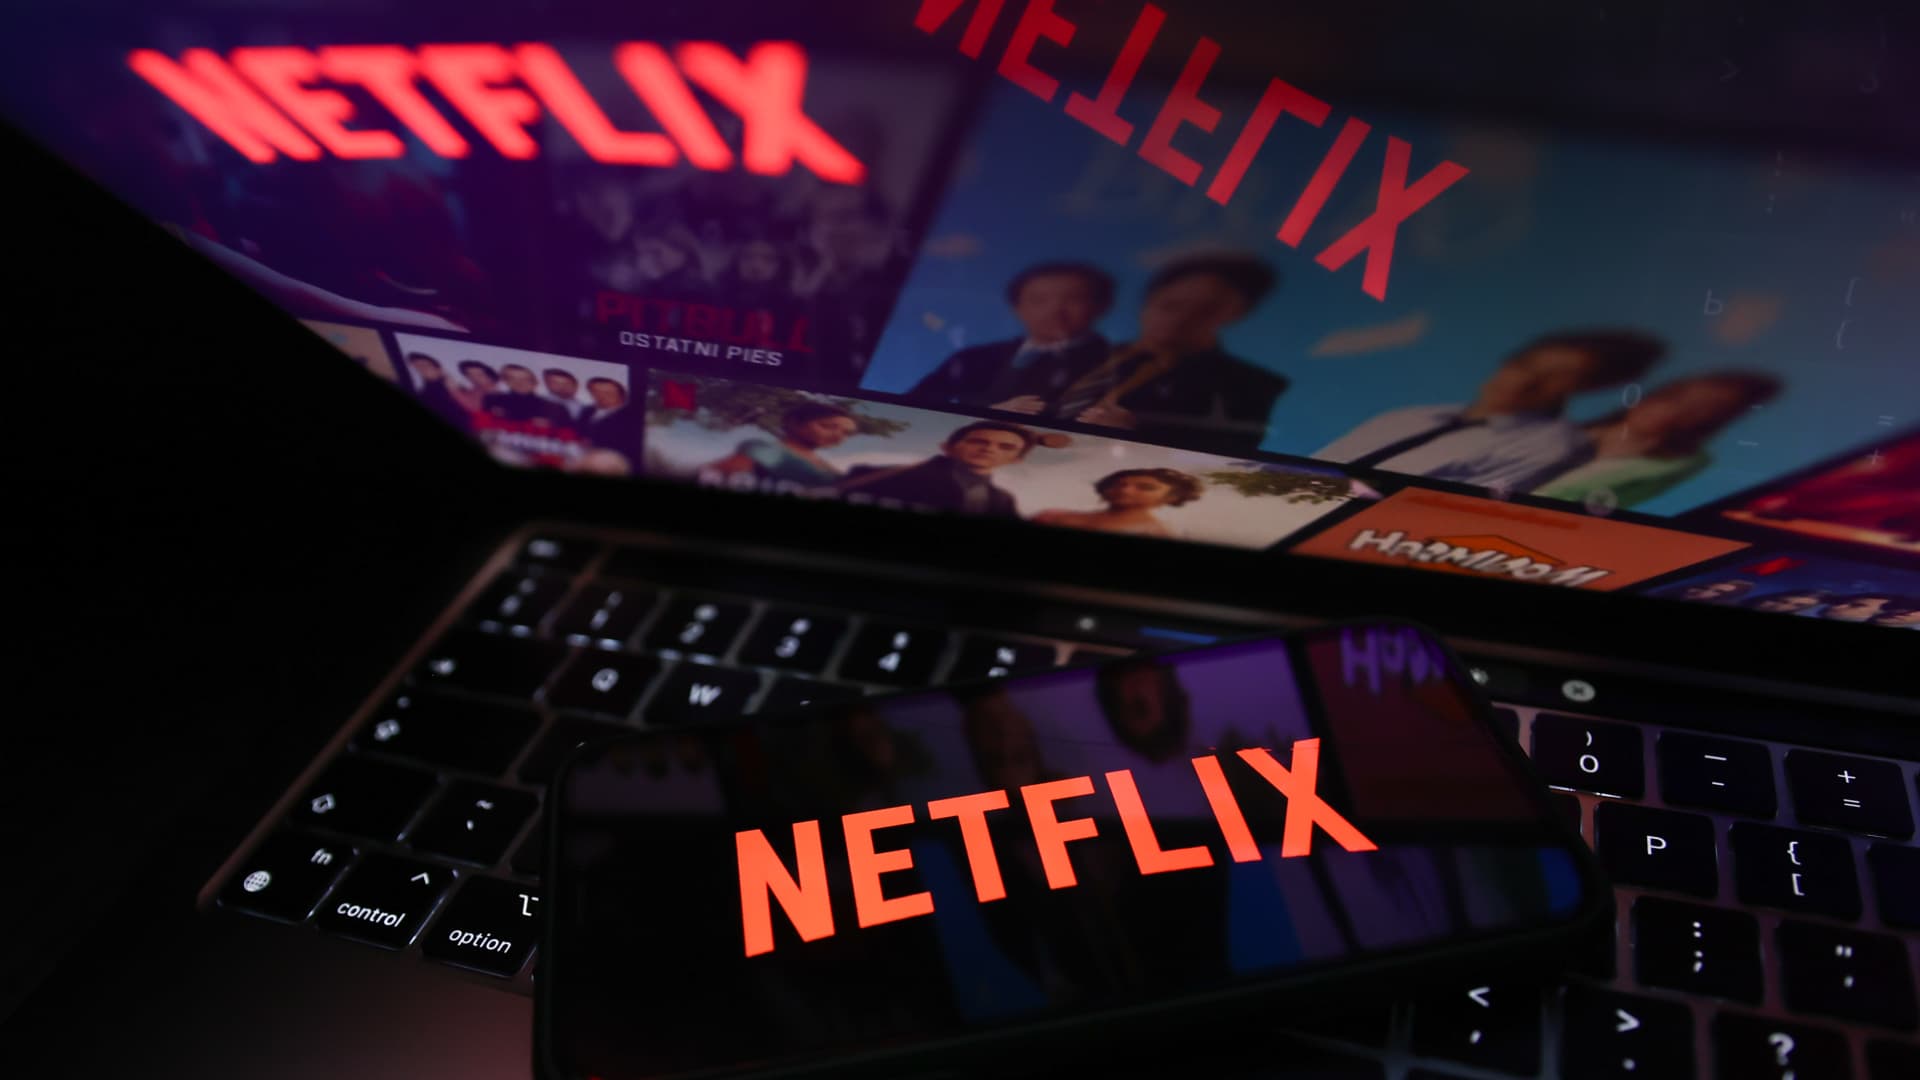 Netflix investors brace for subscriber losses as company works on long-term fixes